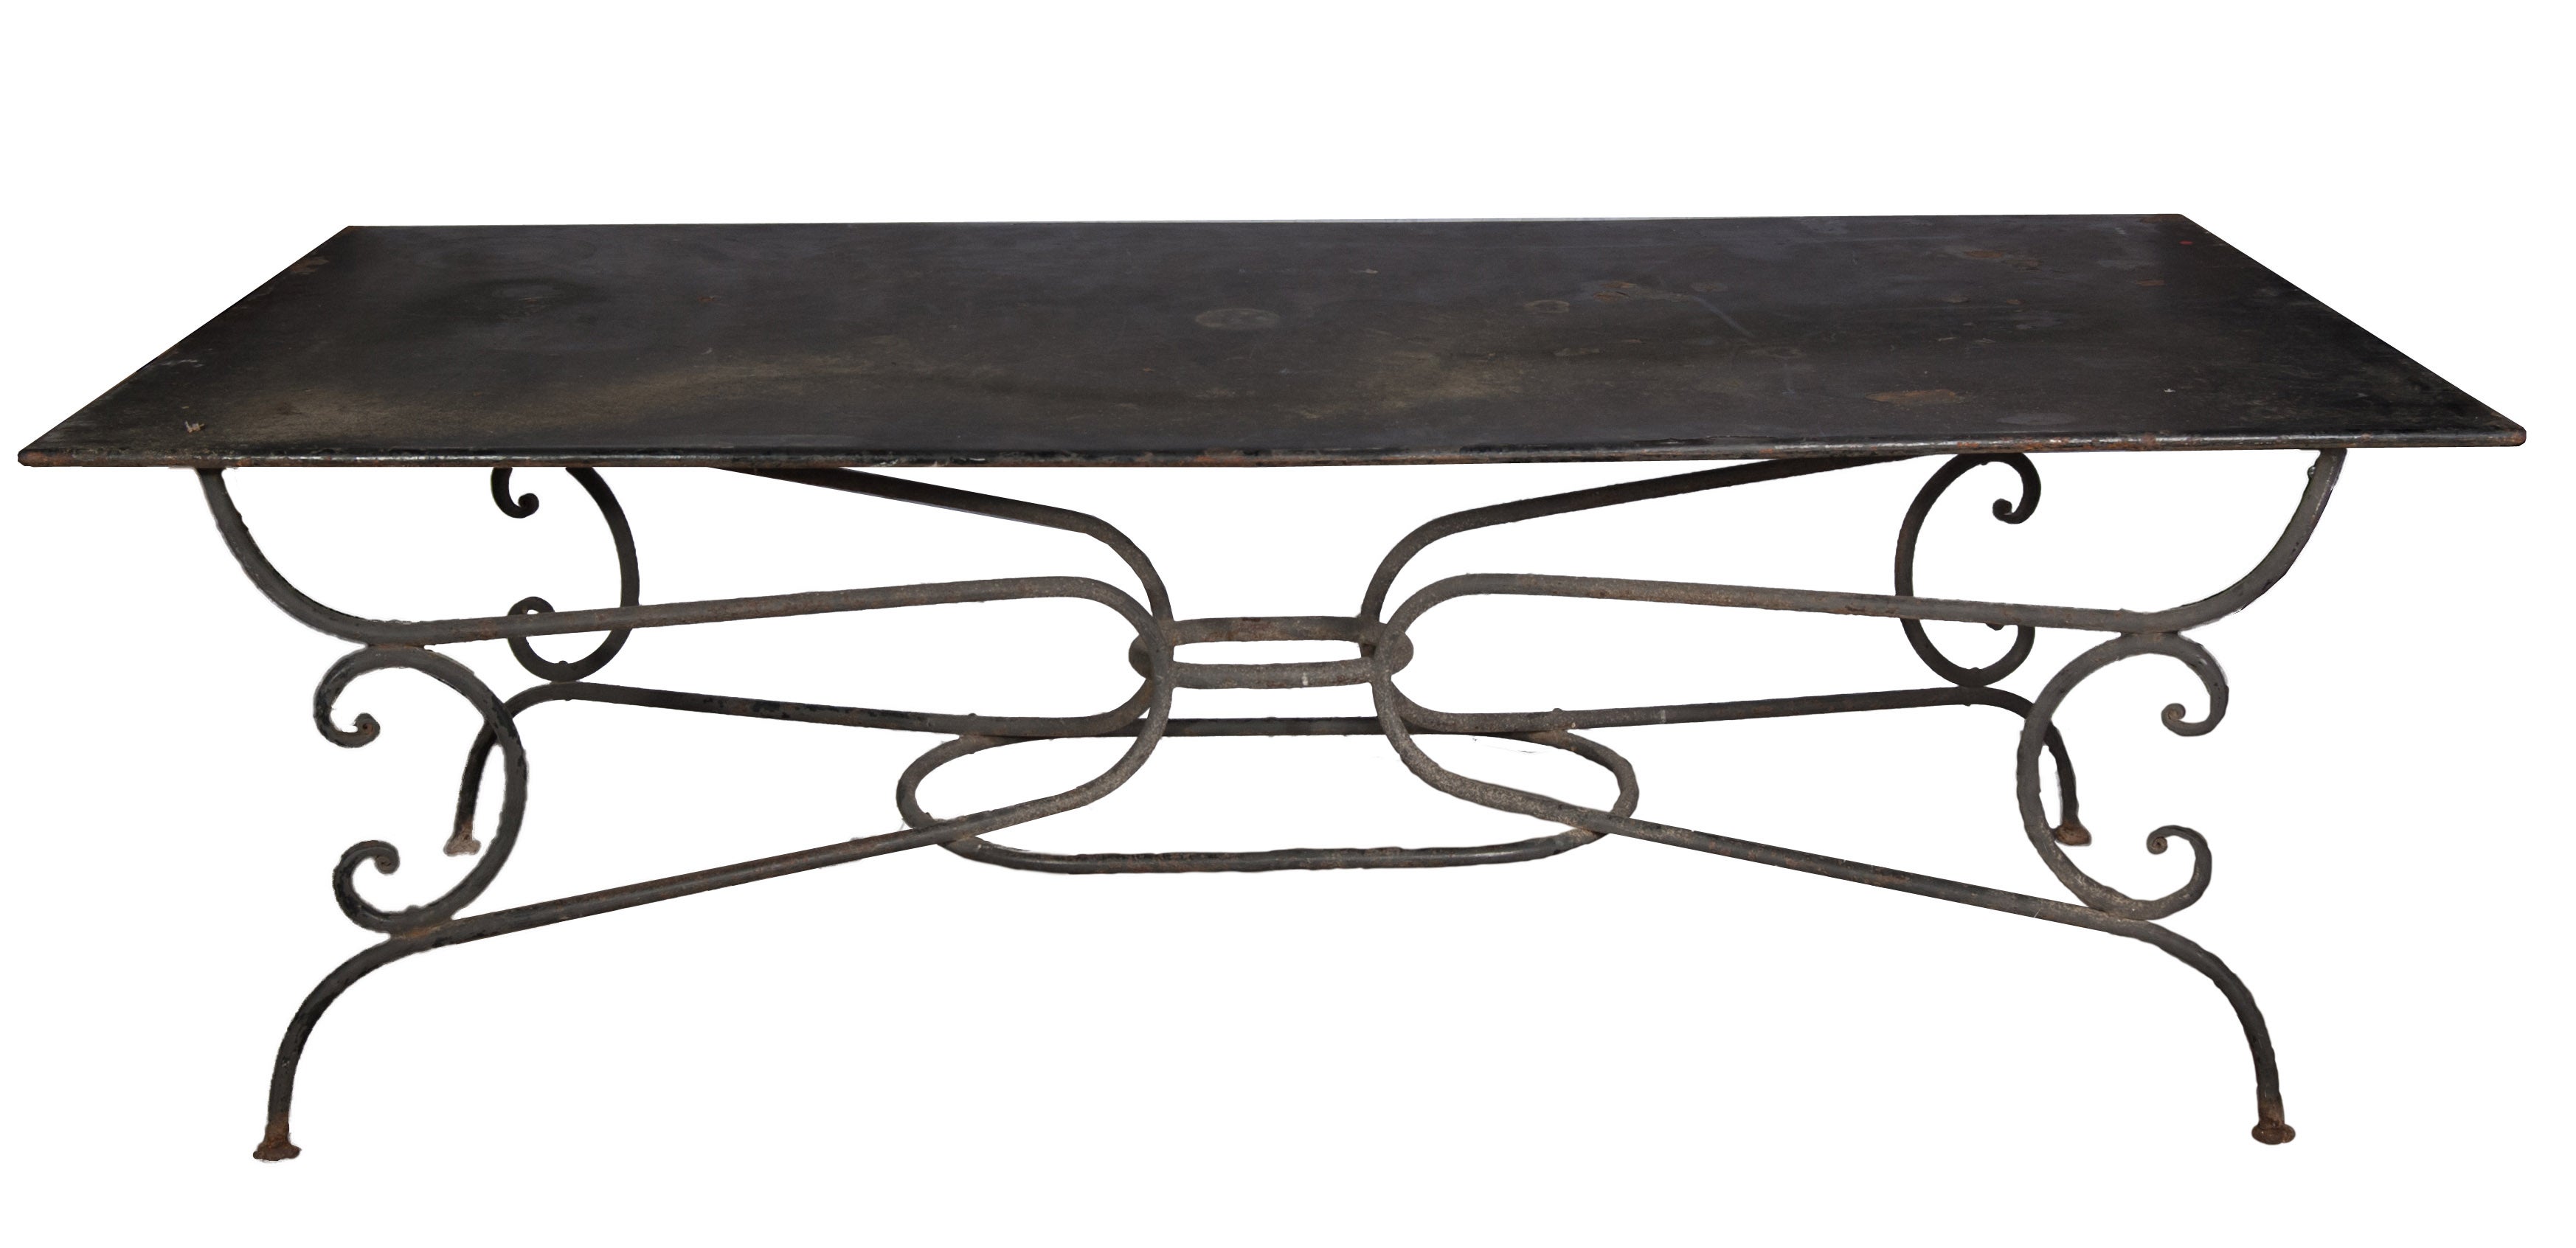 A Large Wrought Iron Garden Table With Metal Double Layer Tin Top.